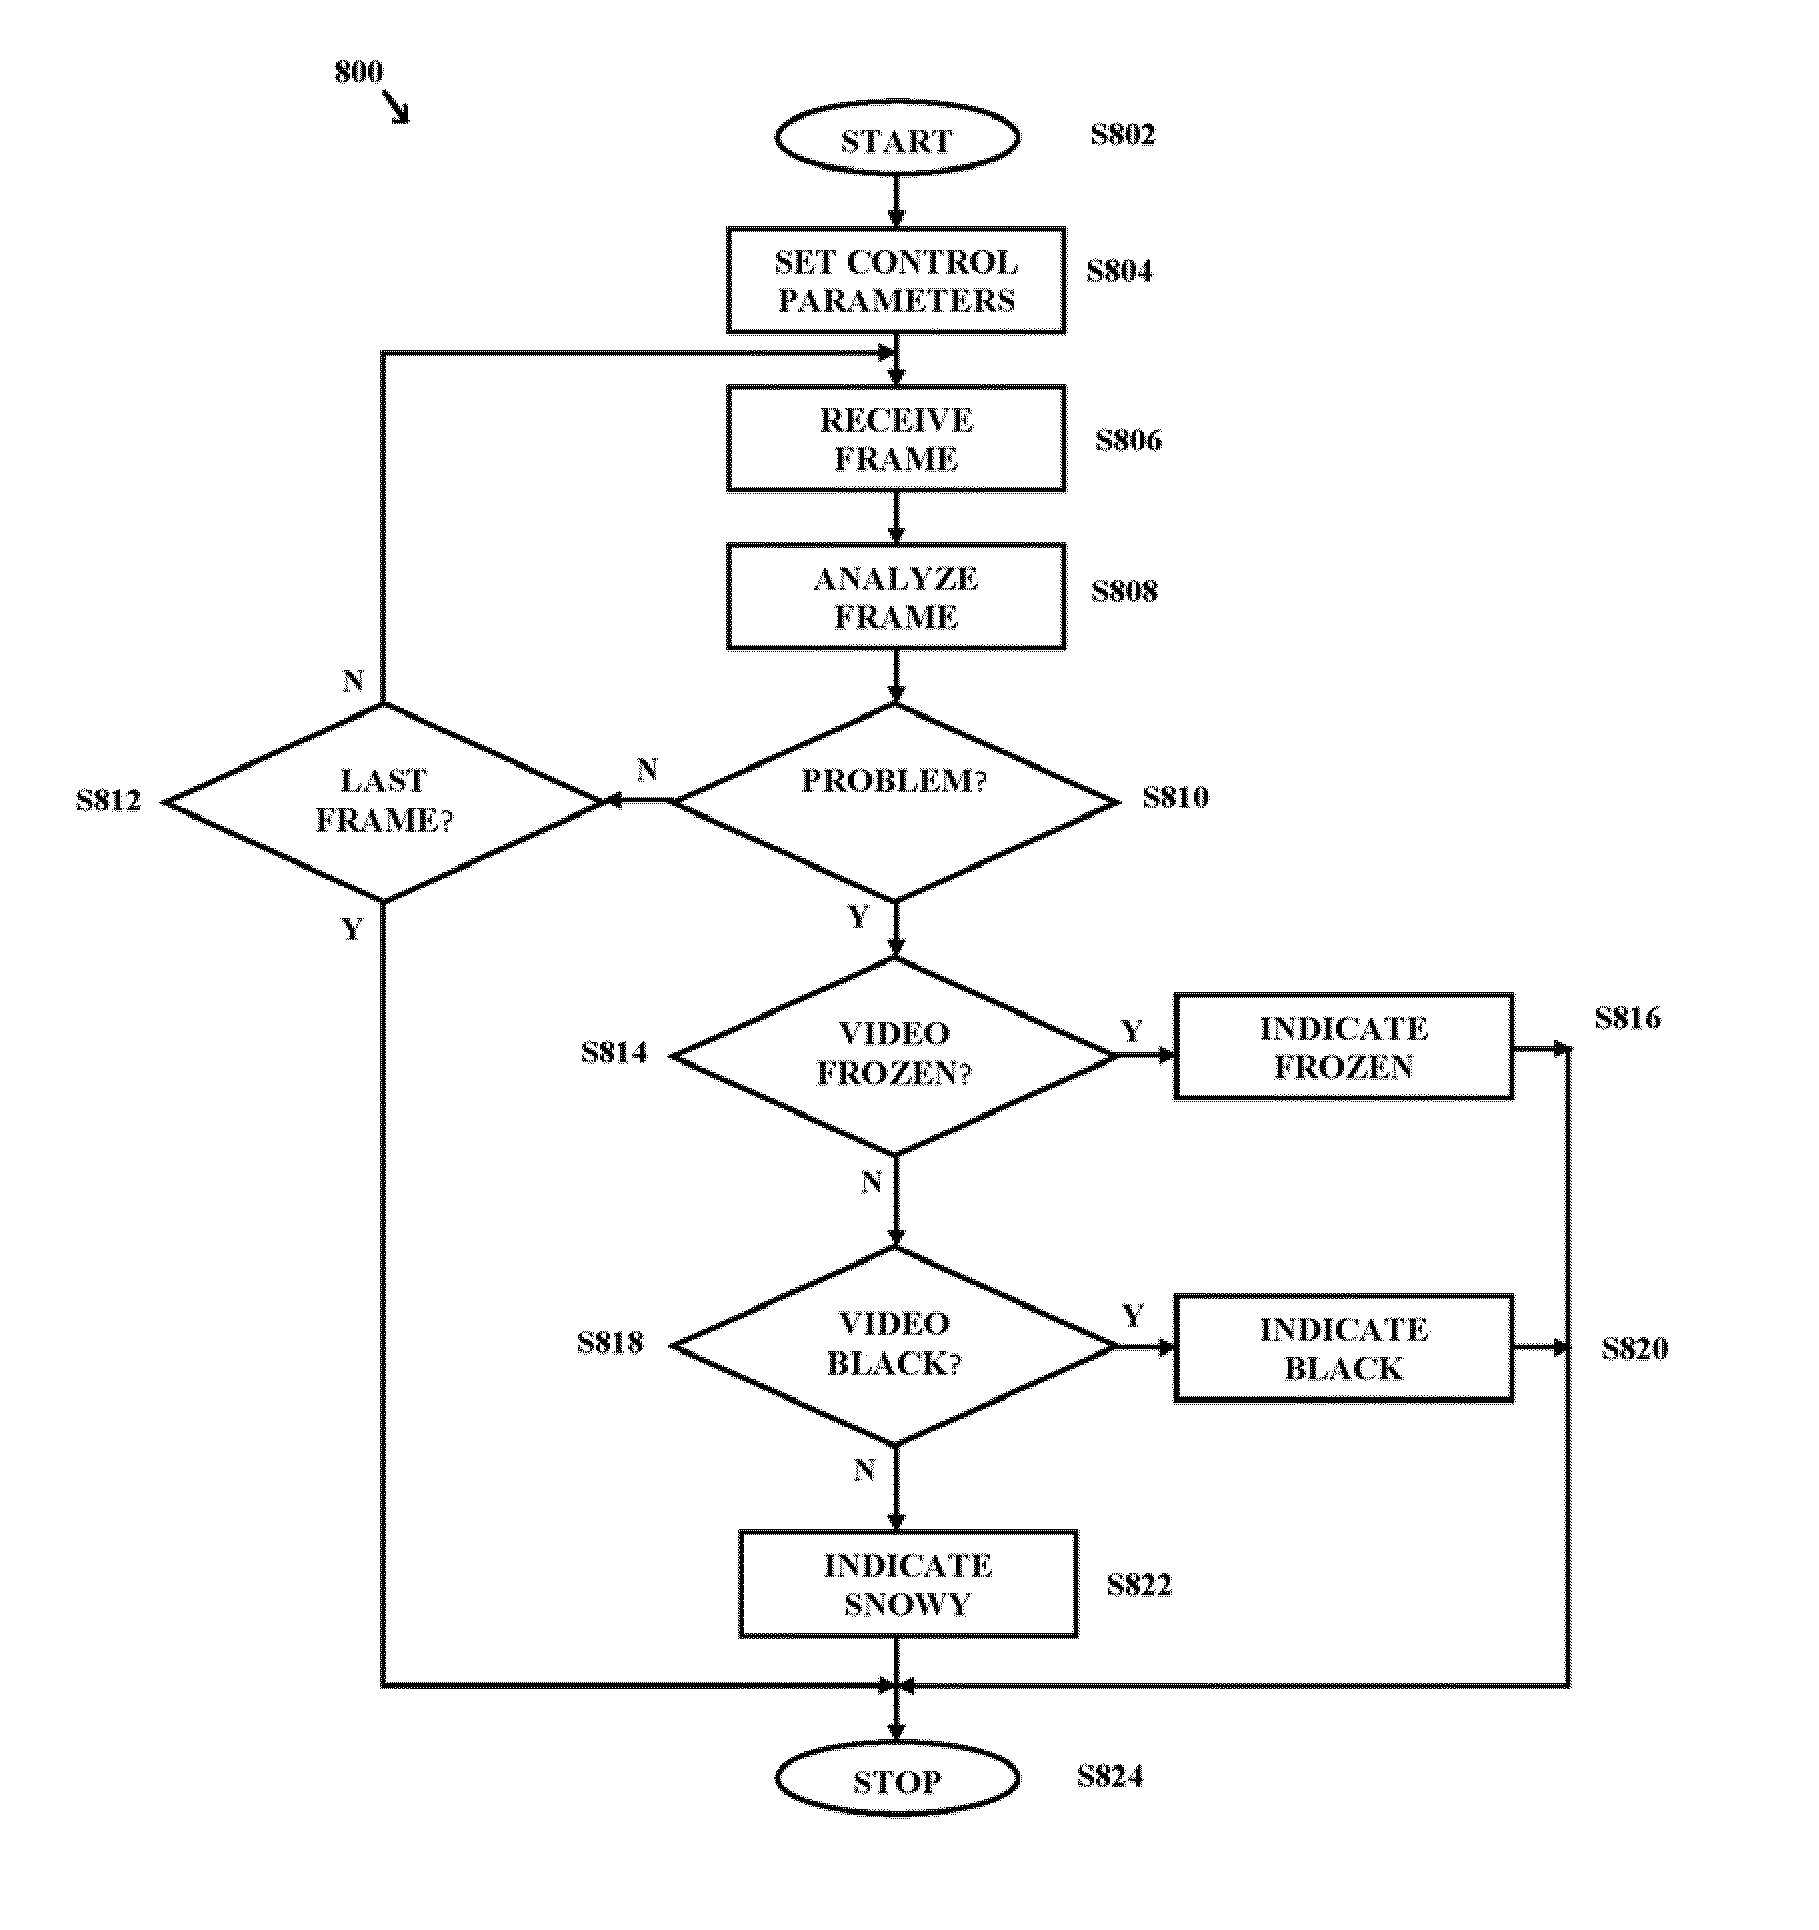 System and method of analyzing video streams for detecting black/snow or freeze